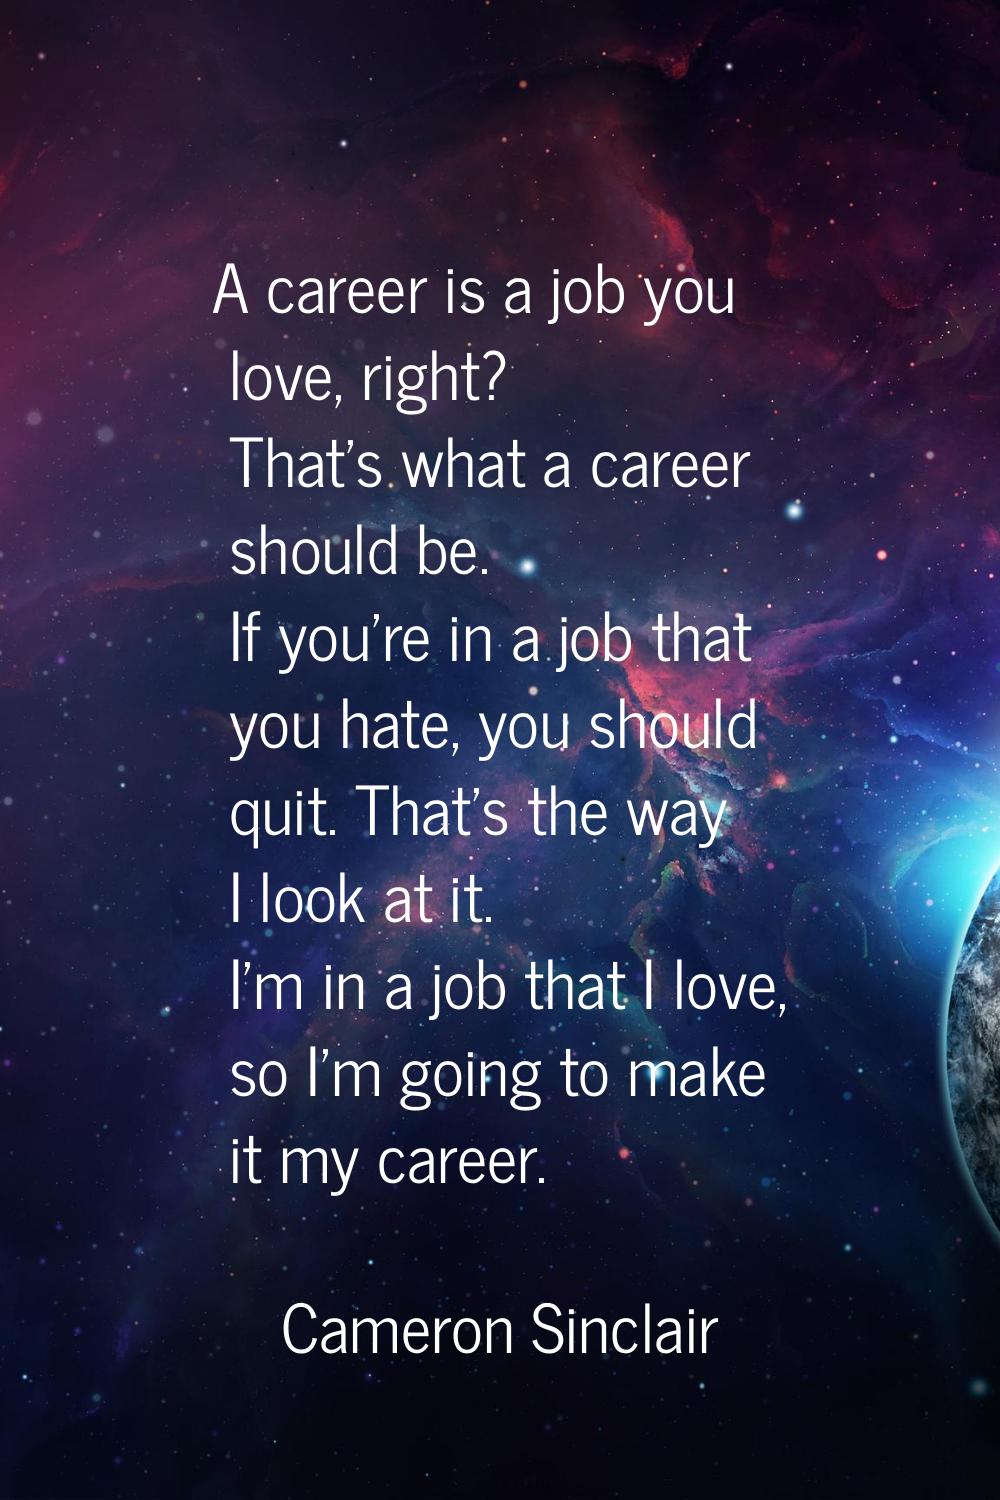 A career is a job you love, right? That's what a career should be. If you're in a job that you hate